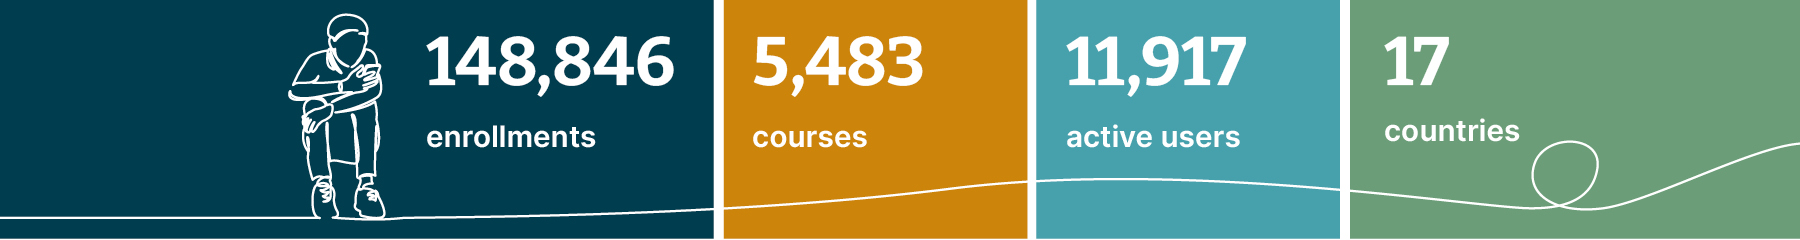 Graphic showing that 11,917 Thoughtworkers were active on our learning platform, Campus in 2021 – making 148,846 enrollments in 5483 courses. 